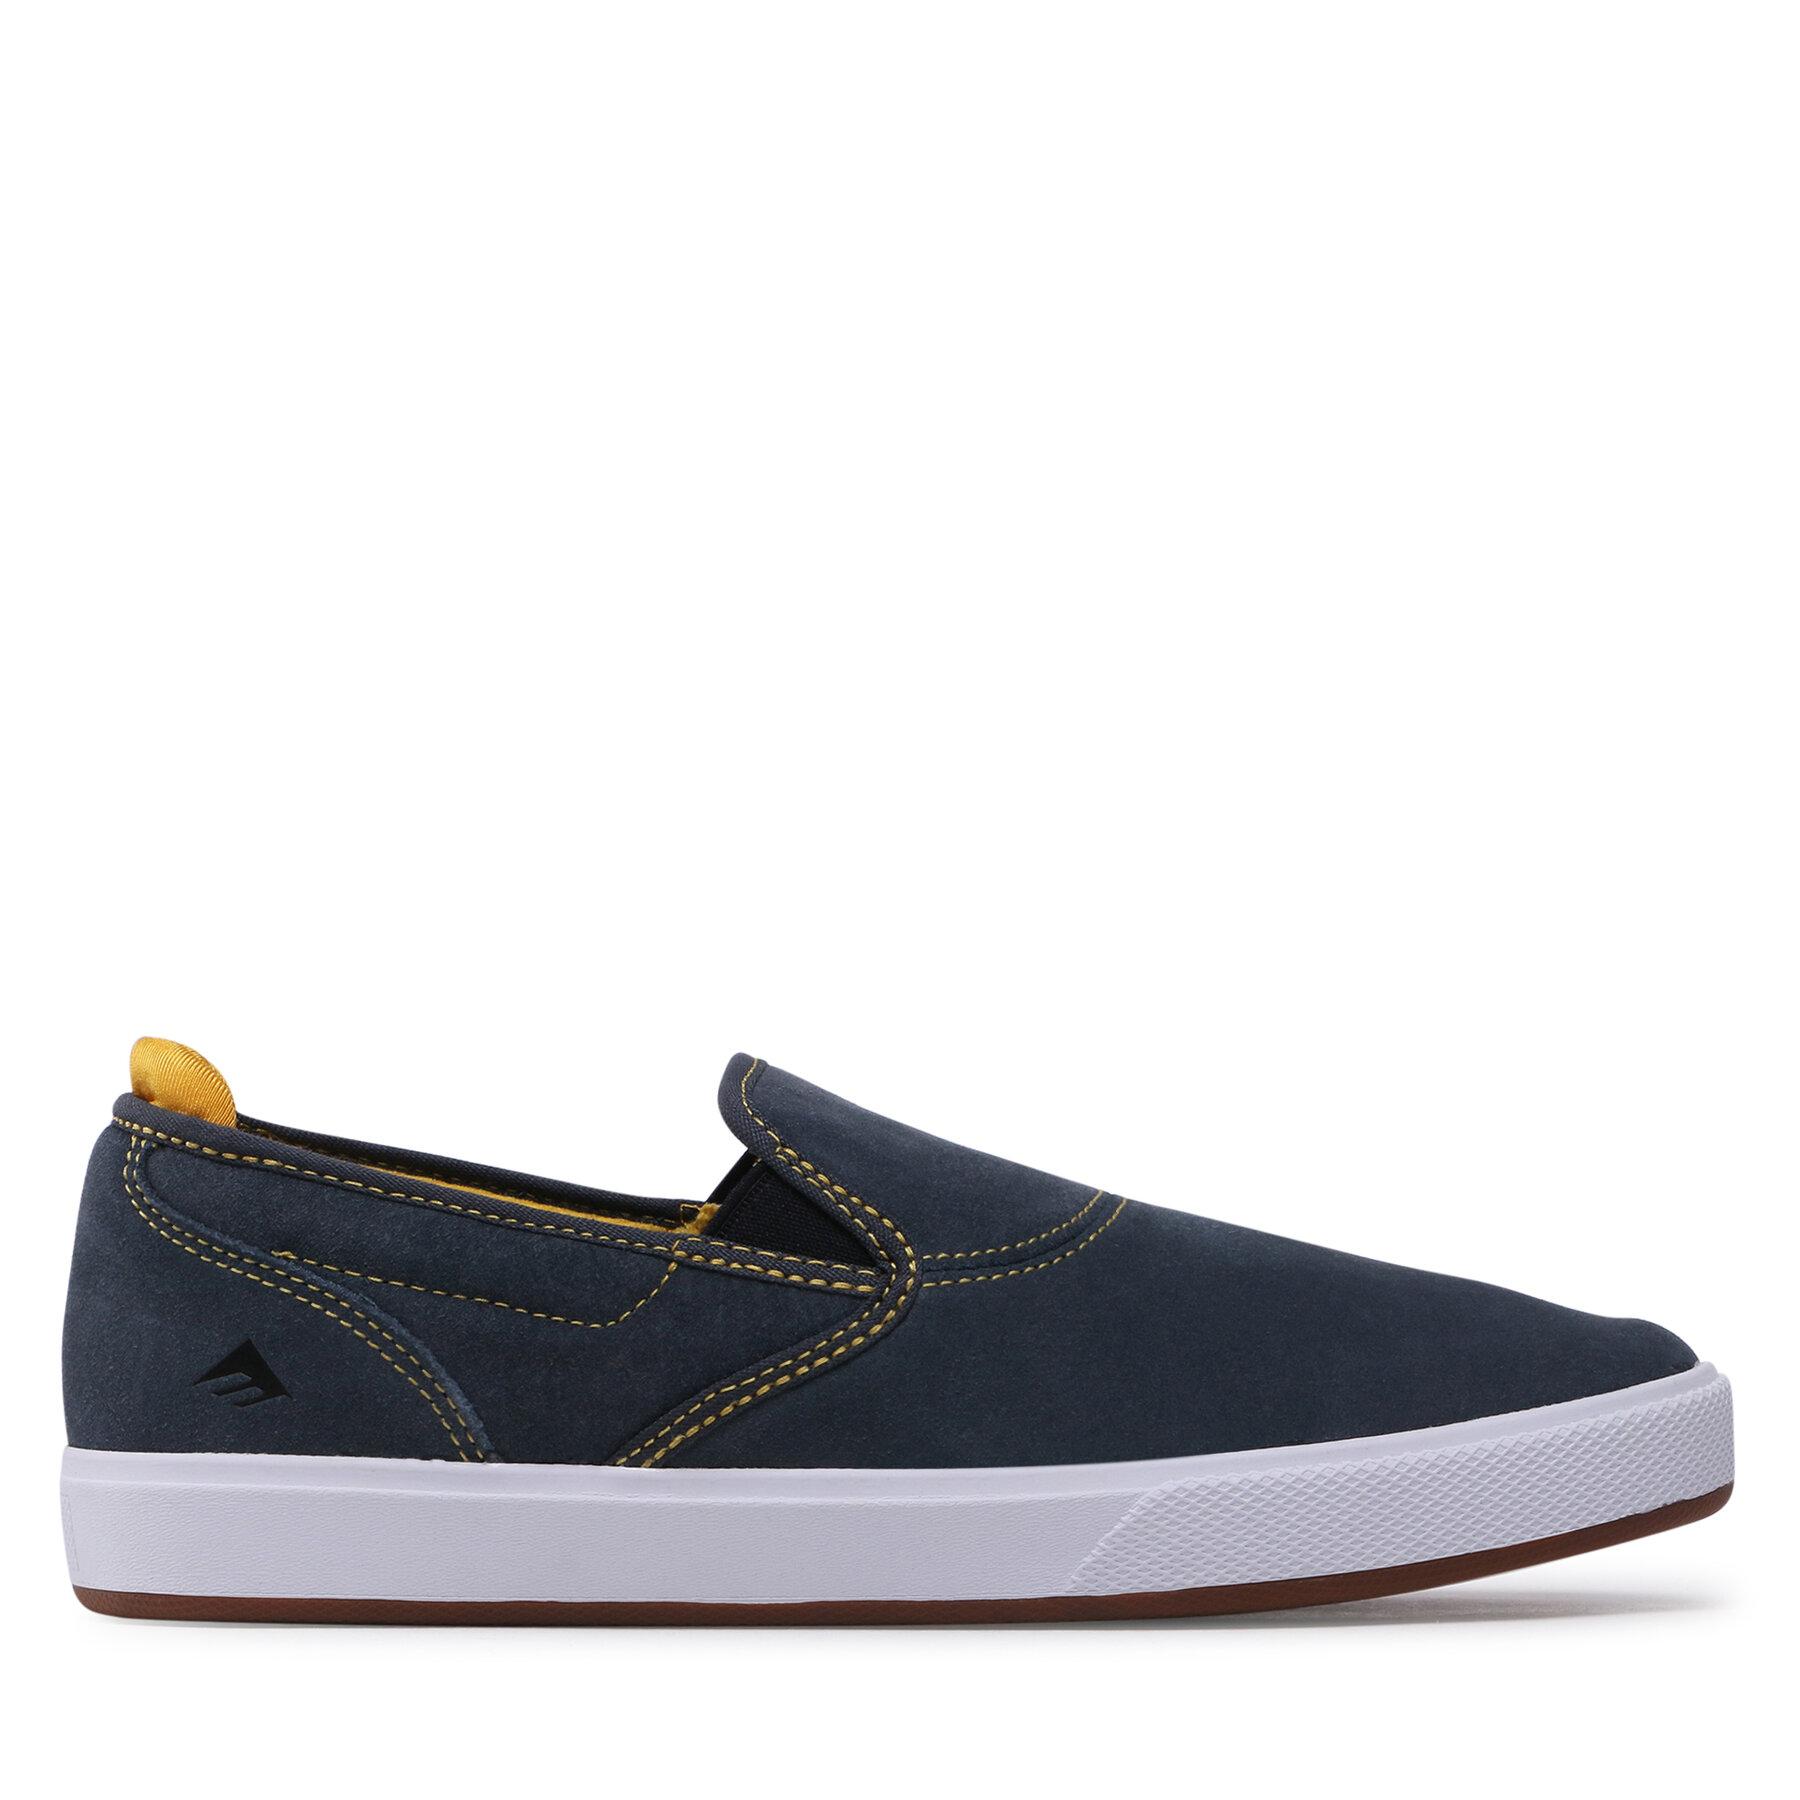 Emerica Wino G6 Slip Cup Gris Grey 020 Chaussures Homme